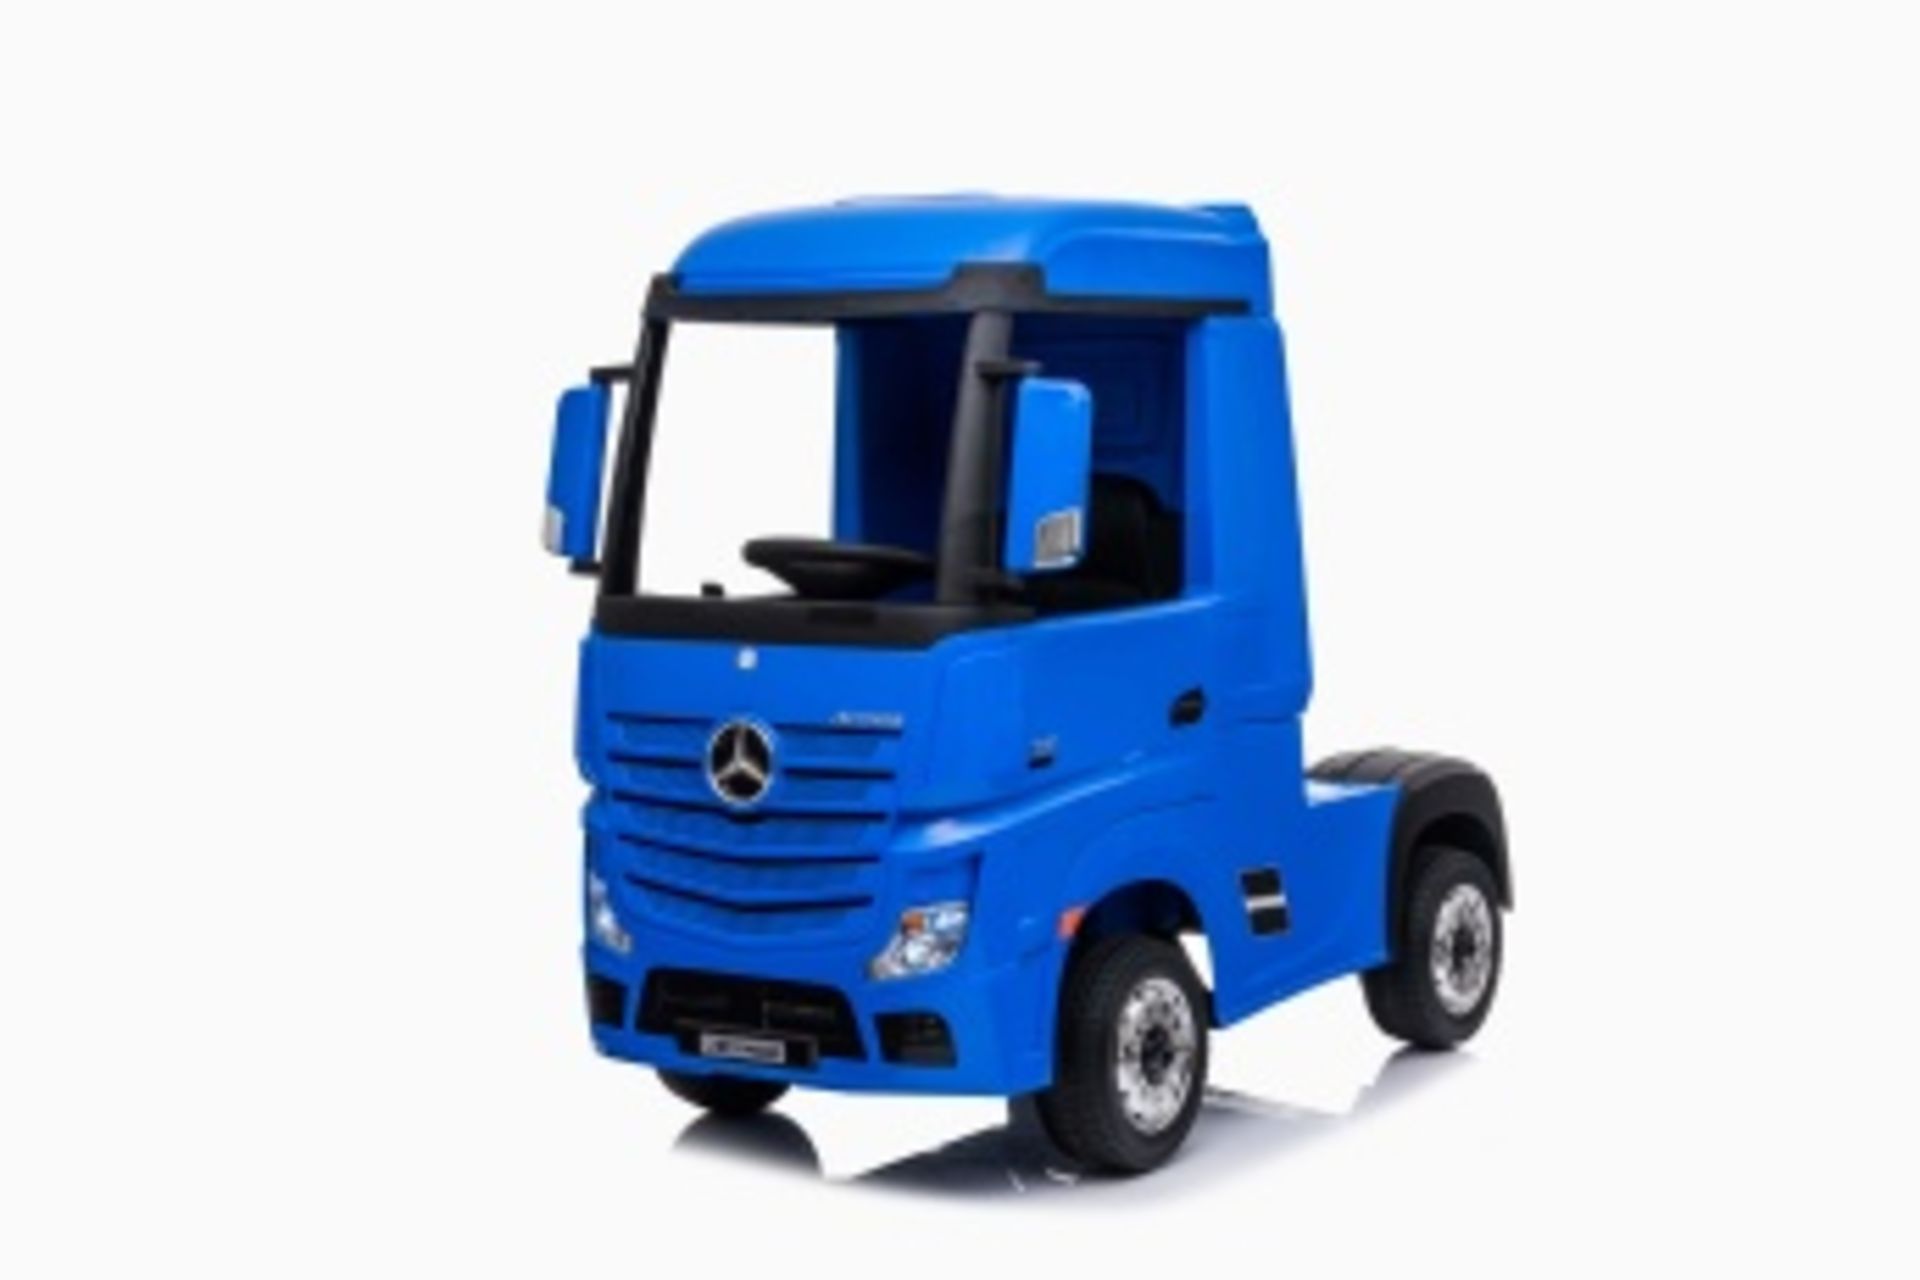 Ride On Fully Licenced Mercedes Benz Actros Truck 24v complete with Official Trailer - Blue - Image 7 of 13